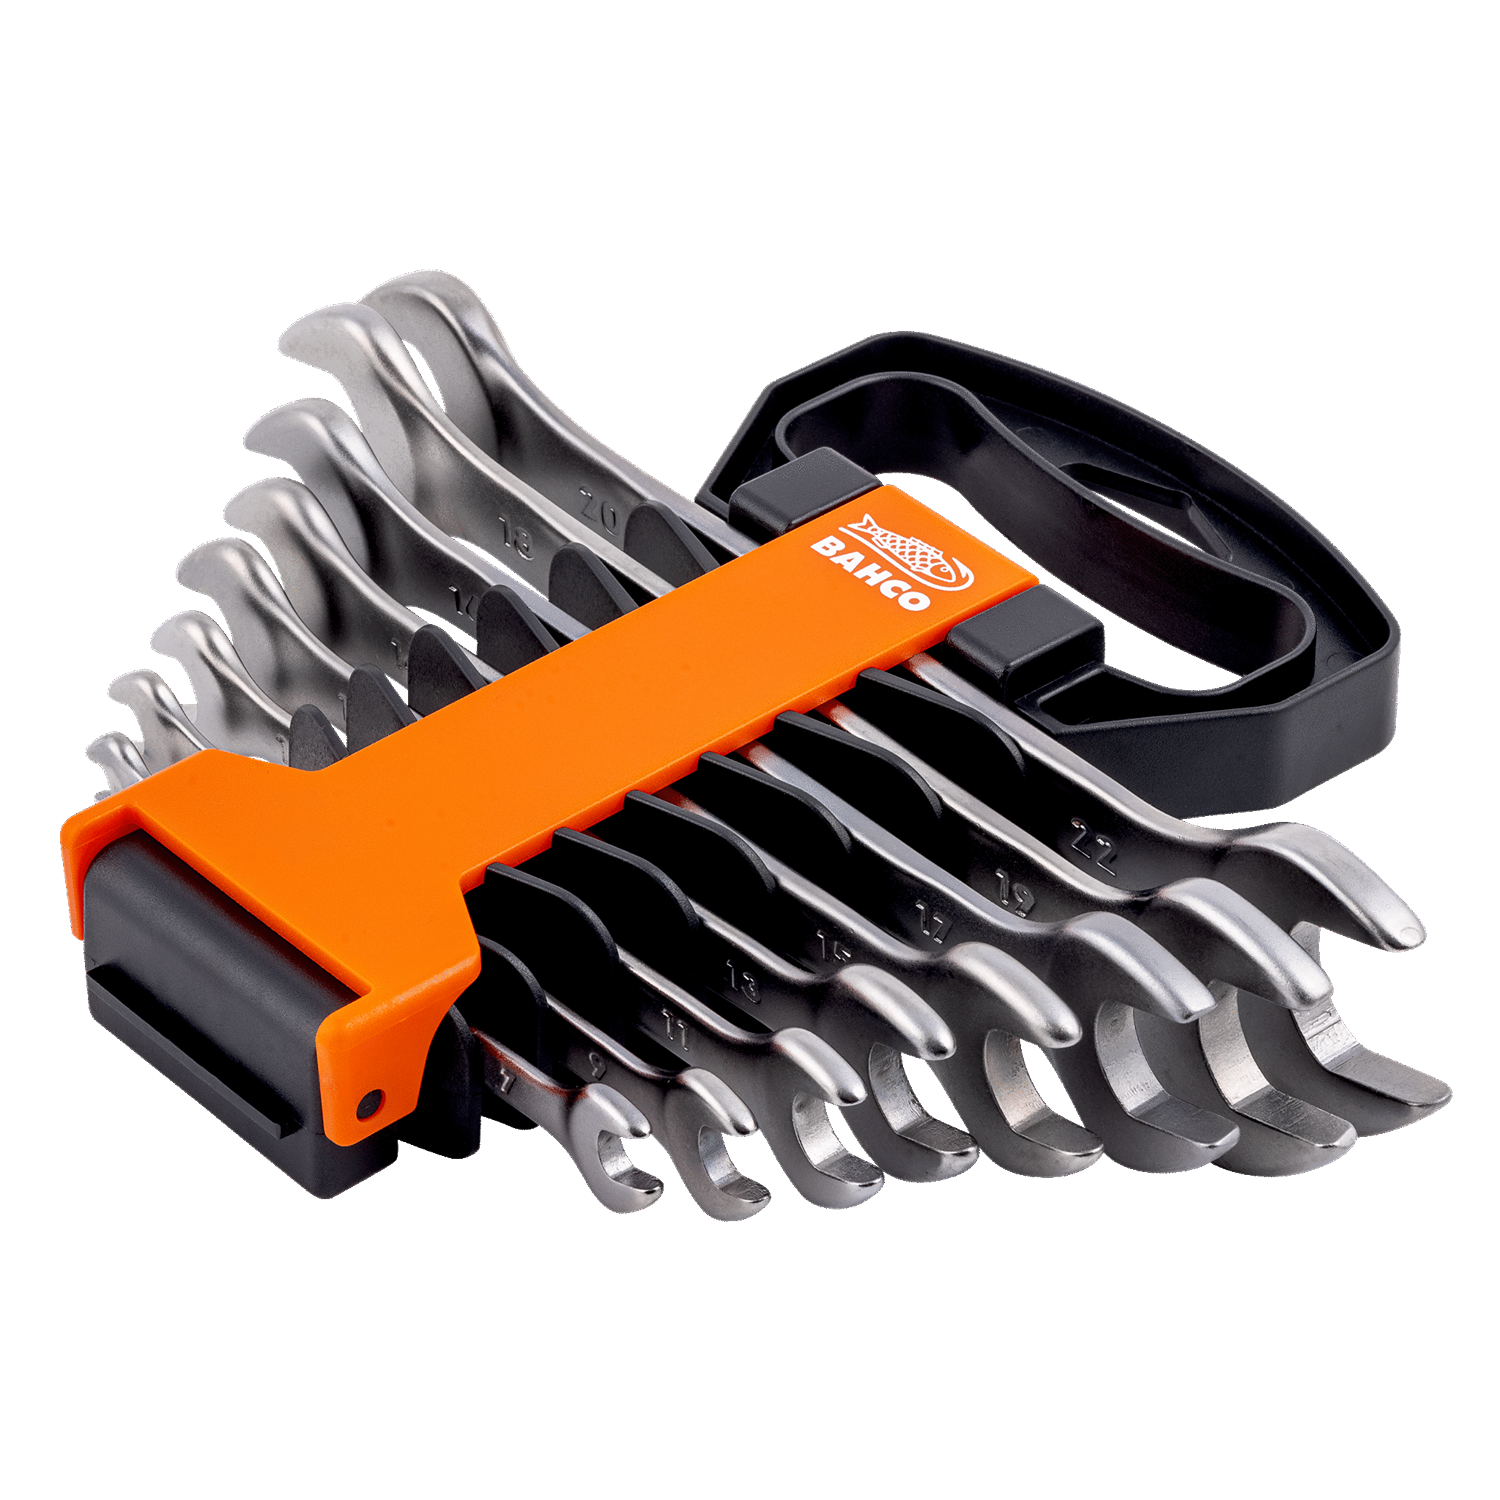 BAHCO 6M/SH8 Metric Double Open Ended Wrench Set - 8 Pcs - Premium Double Open Ended Wrench Set from BAHCO - Shop now at Yew Aik.